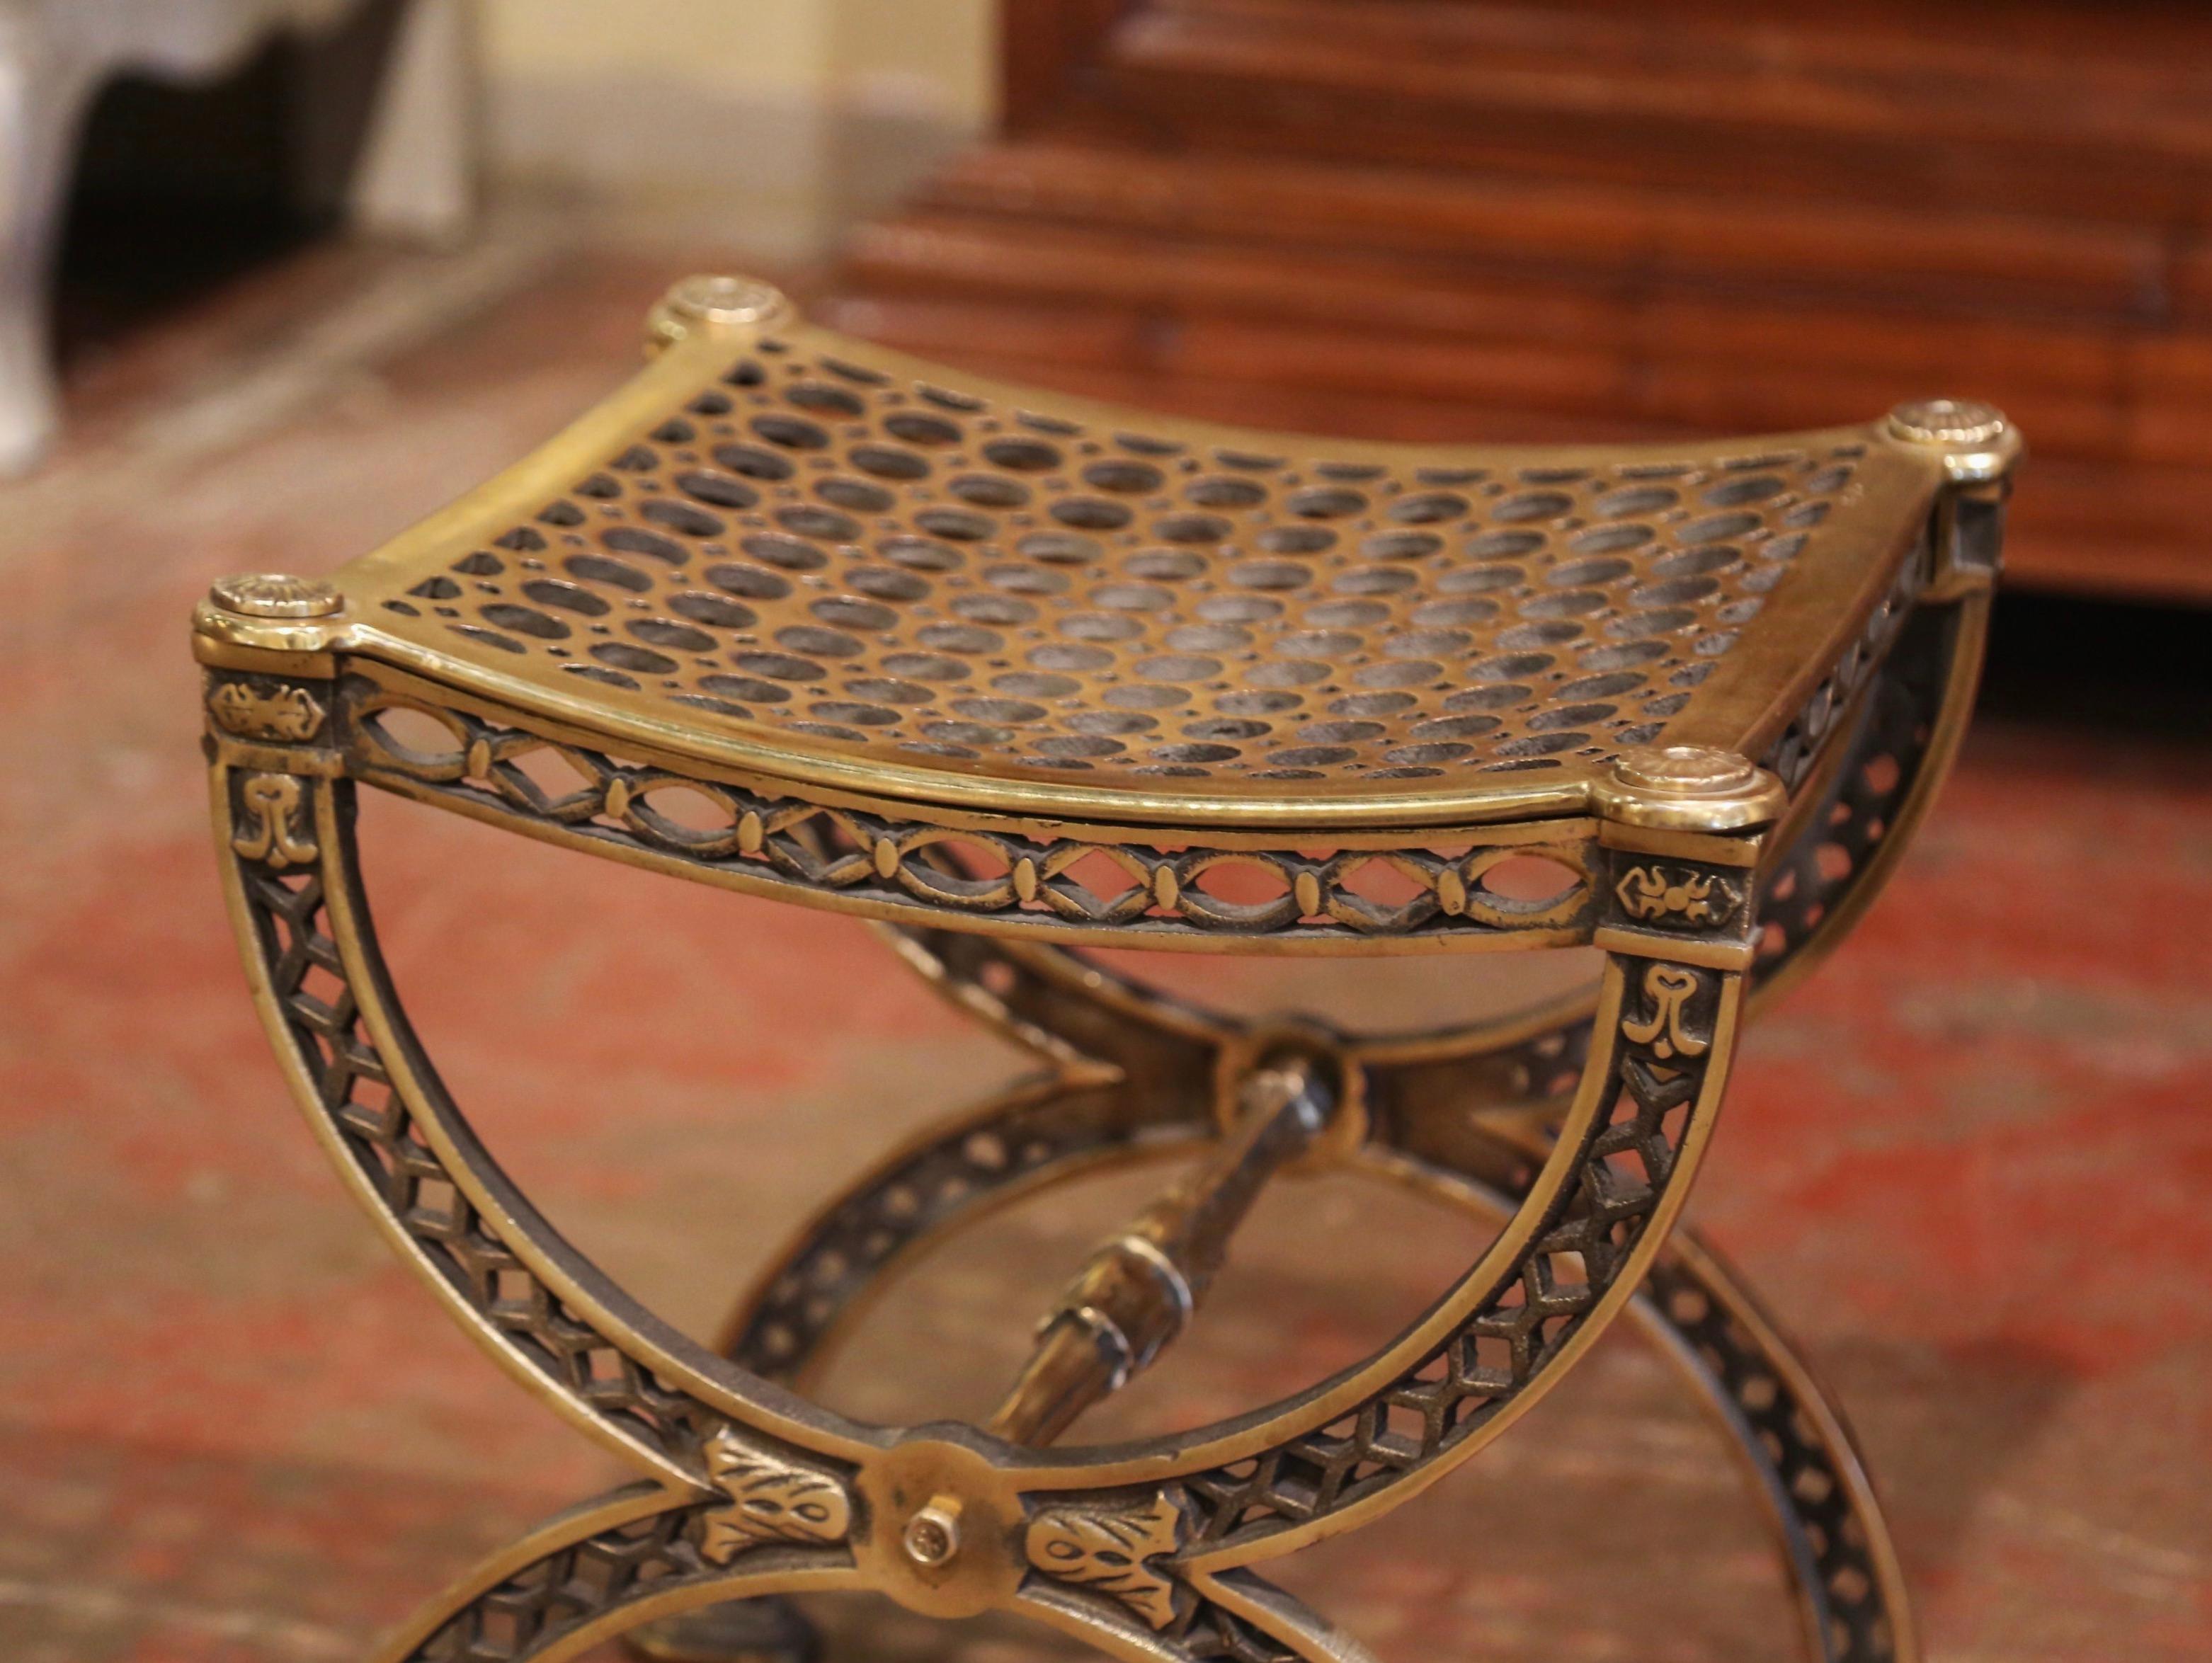 Place this elegant antique stool in a master bathroom and use it as a vanity seating! Crafted in France circa 1880 and made of bronze, the chair stands on forged Dagobert (or Curule) legs connected with a delicate stretcher over a pierces apron; the